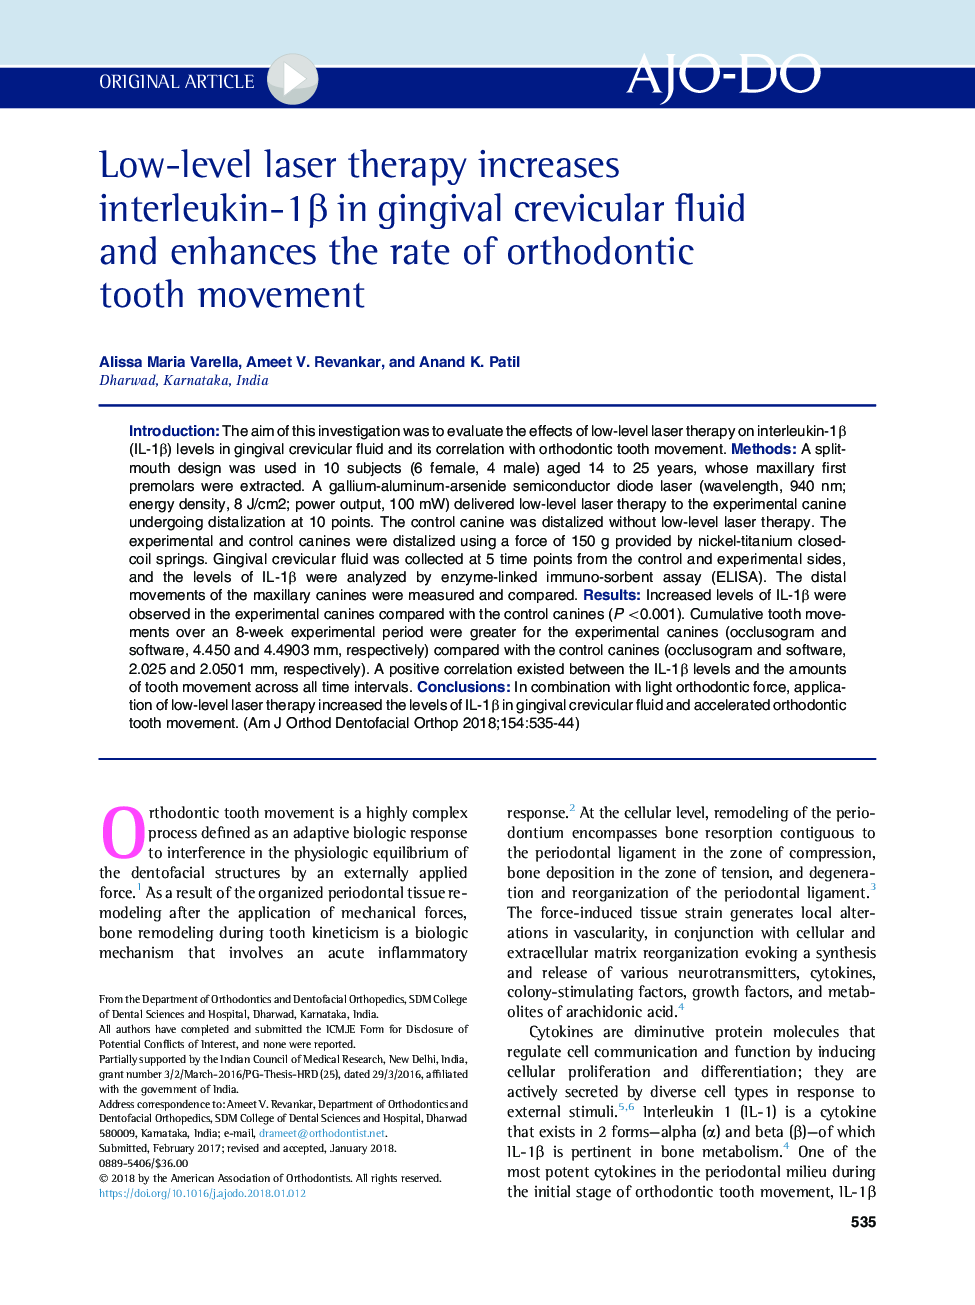 Low-level laser therapy increases interleukin-1Î² in gingival crevicular fluid and enhances the rate of orthodontic tooth movement